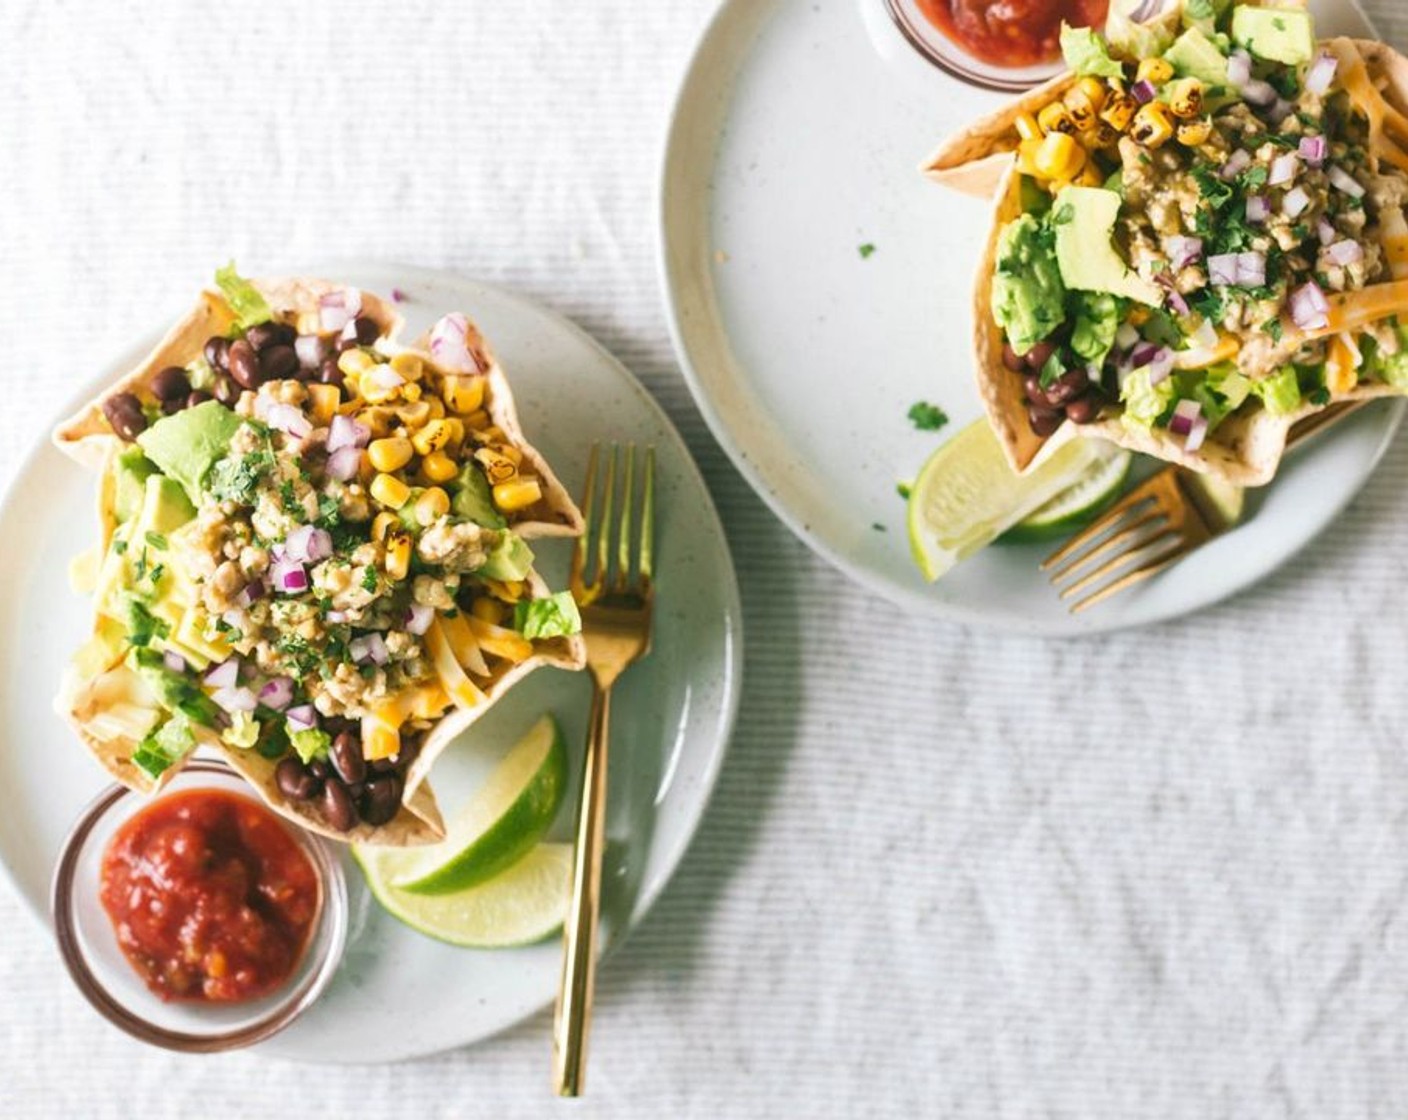 step 5 Top with Salsa Verde chicken, Corn (1 cup), Black Beans (1 cup), Monterey Jack Cheese (1 cup), Avocado (1), Red Onion (1/4 cup) Fresh Cilantro (1/4 cup), and Medium Salsa (1/3 cup). Serve immediately.